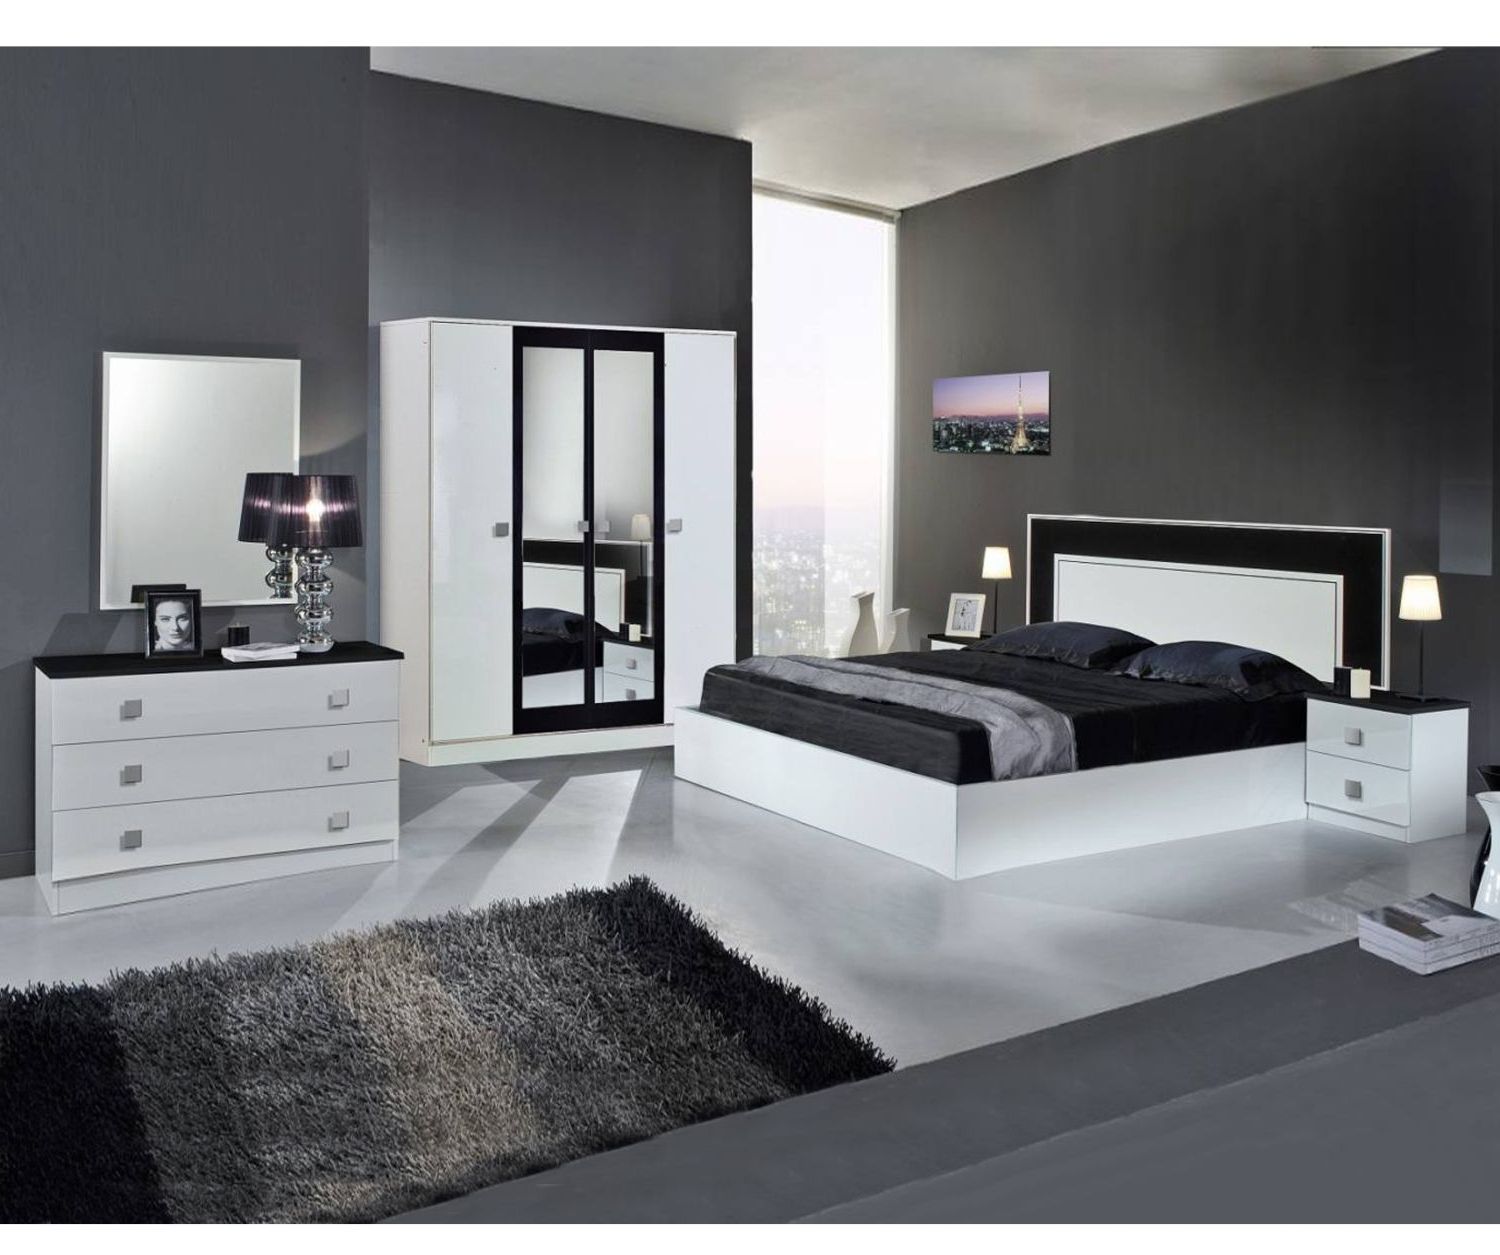 Dima Mobili Amal White And Black Bedroom Set With 4 Door Wardrobe Pertaining To Black And White Wardrobes Set (Gallery 6 of 20)